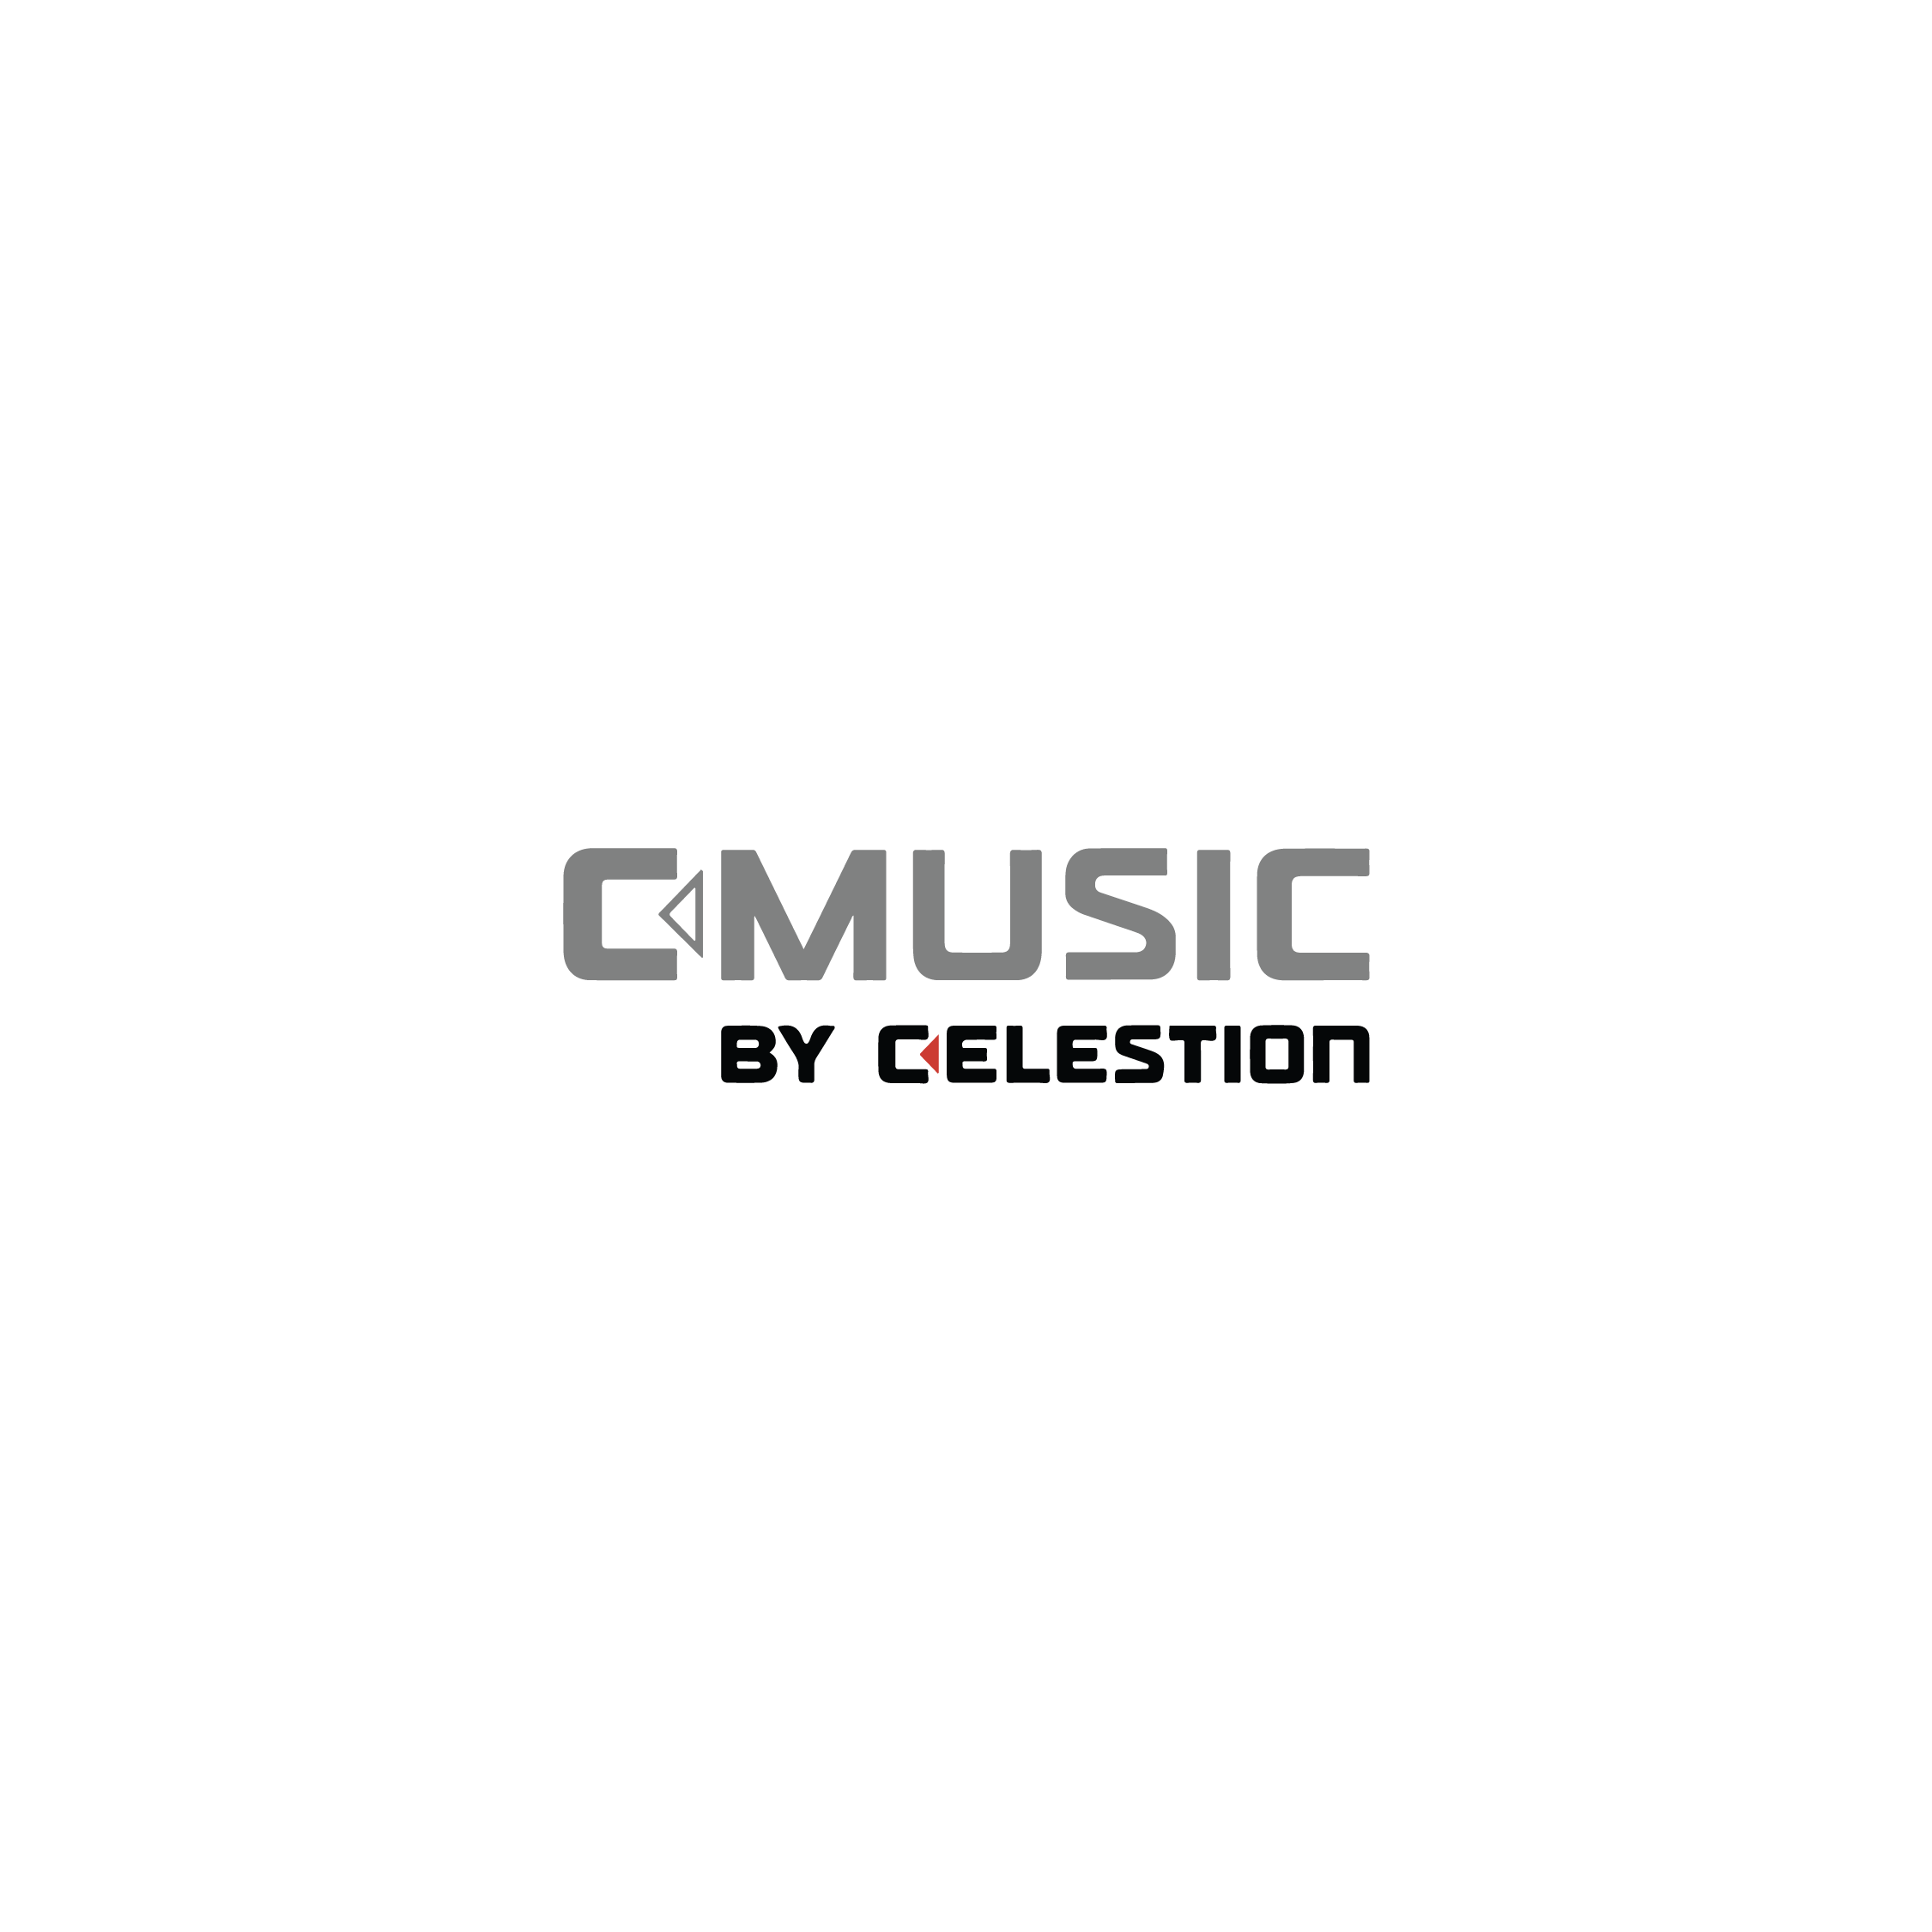 C Music by Celestion